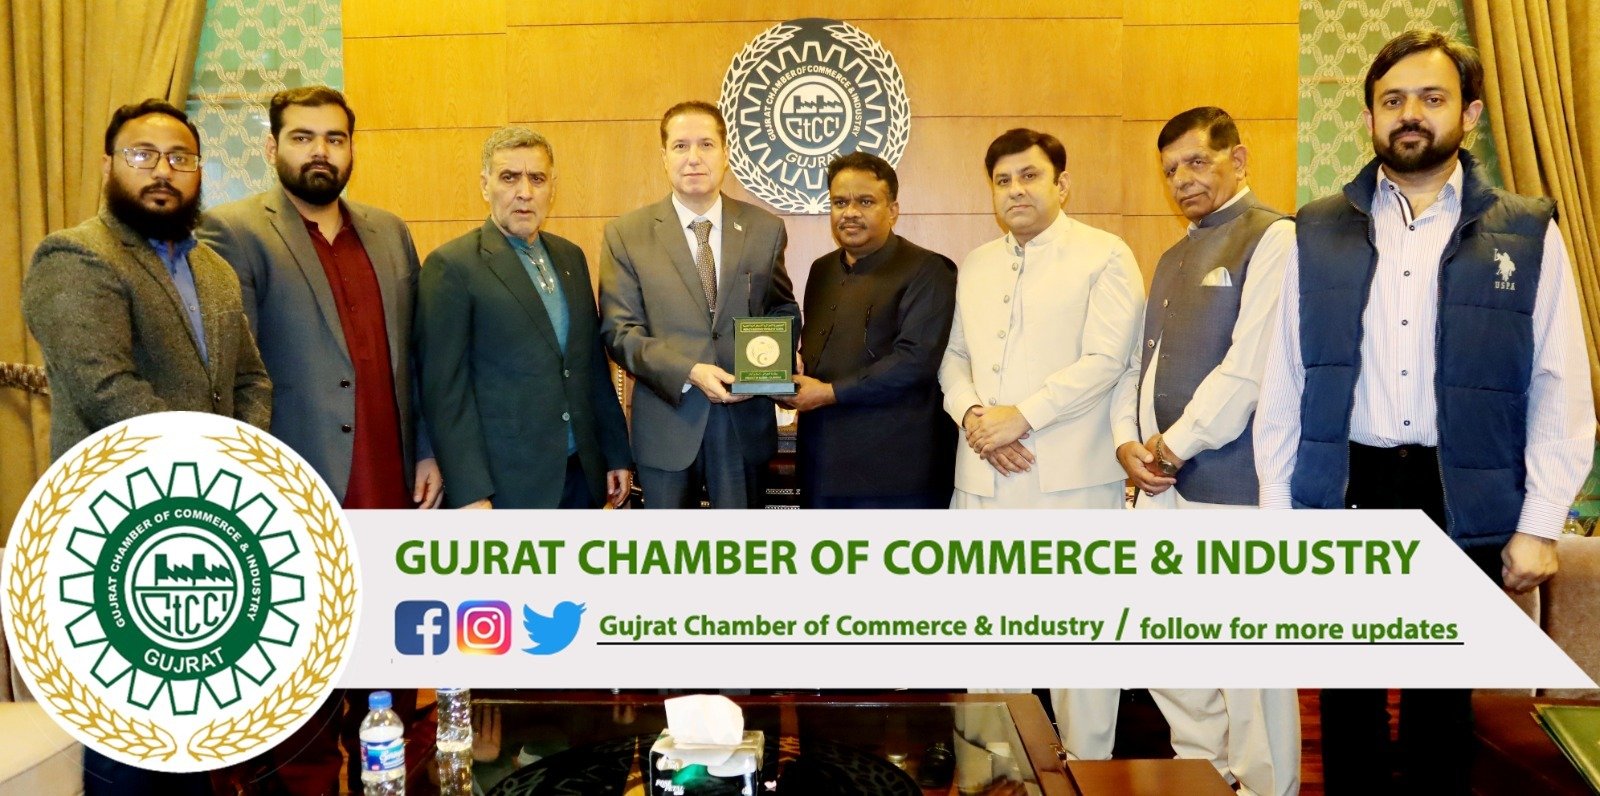 Gujrat Chamber of Commerce & Industry Hosts His Excellency Mr. Brahim Romani, #Ambassador of #Algeria to #Pakistan. A formal meeting session was convened, chaired by Mr. Muhammad Asad Bhatti, #Senior_Vice_President of GtCCI.